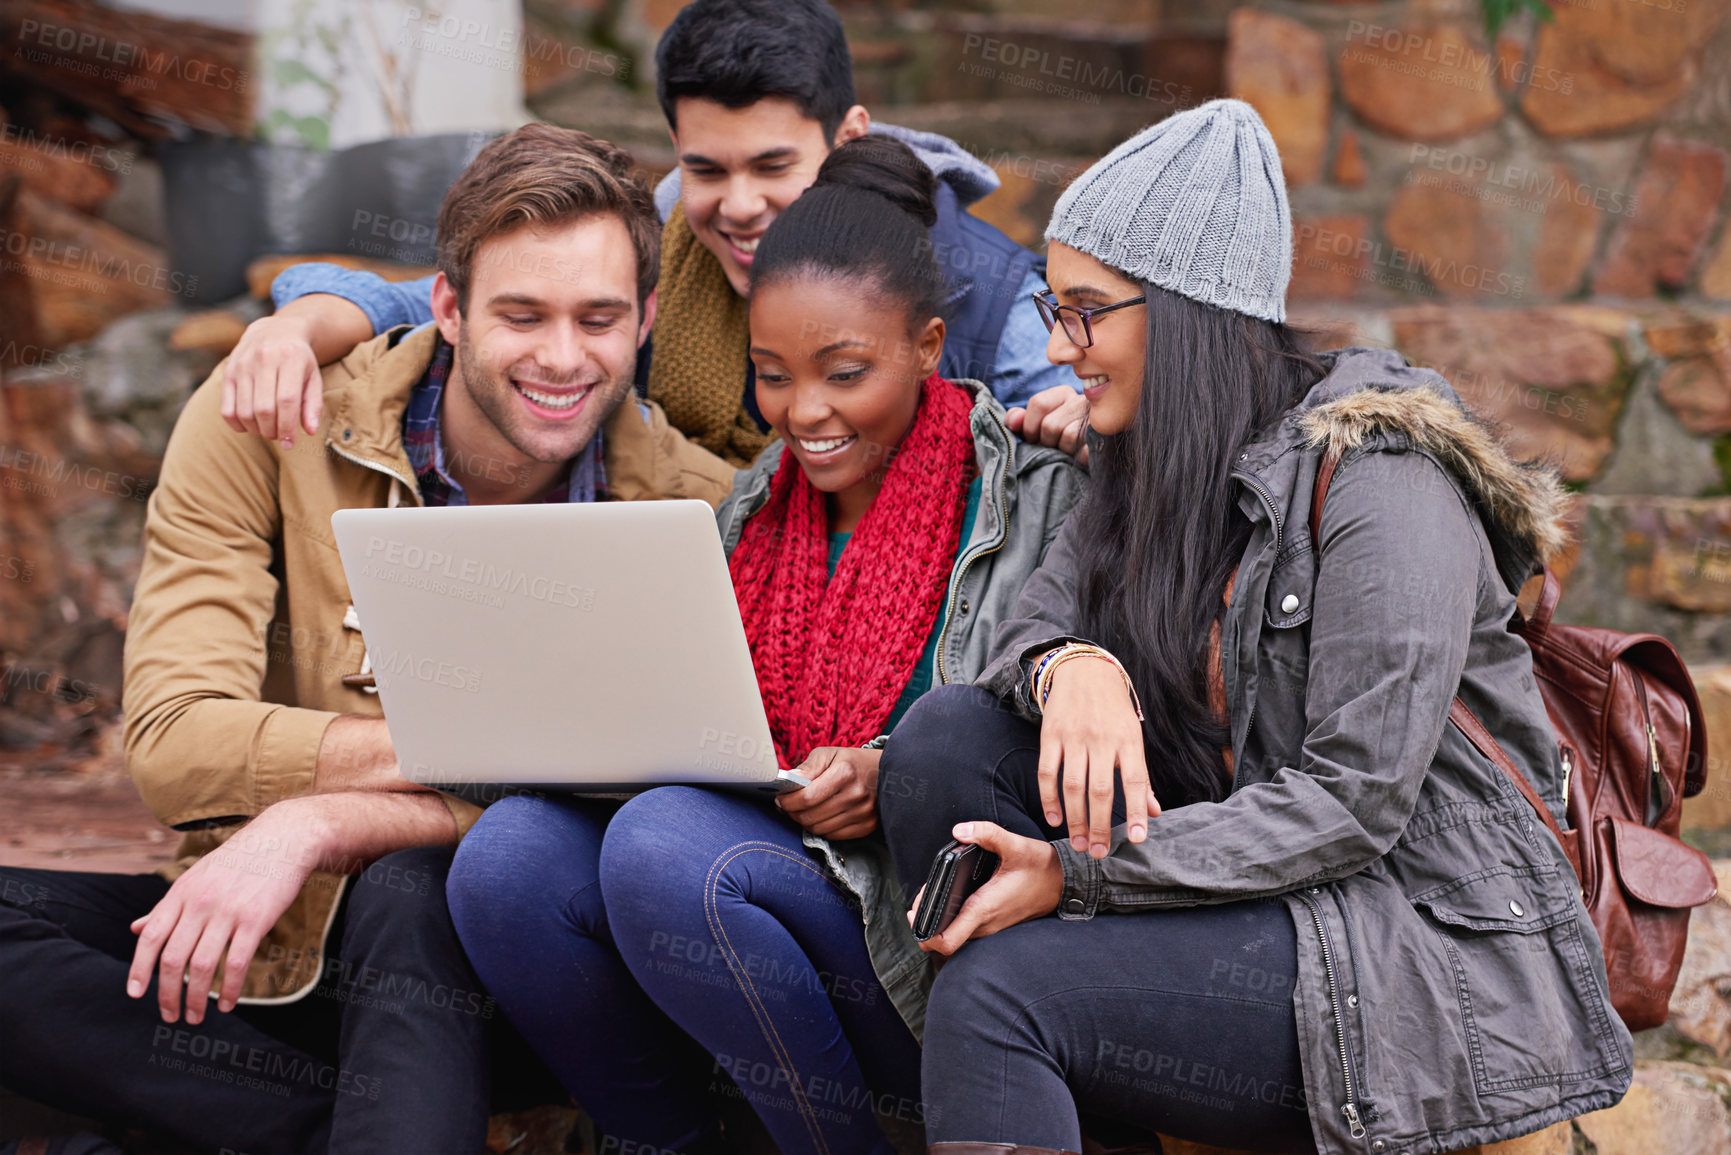 Buy stock photo Cropped shot of university students using a laptop while sitting on campus